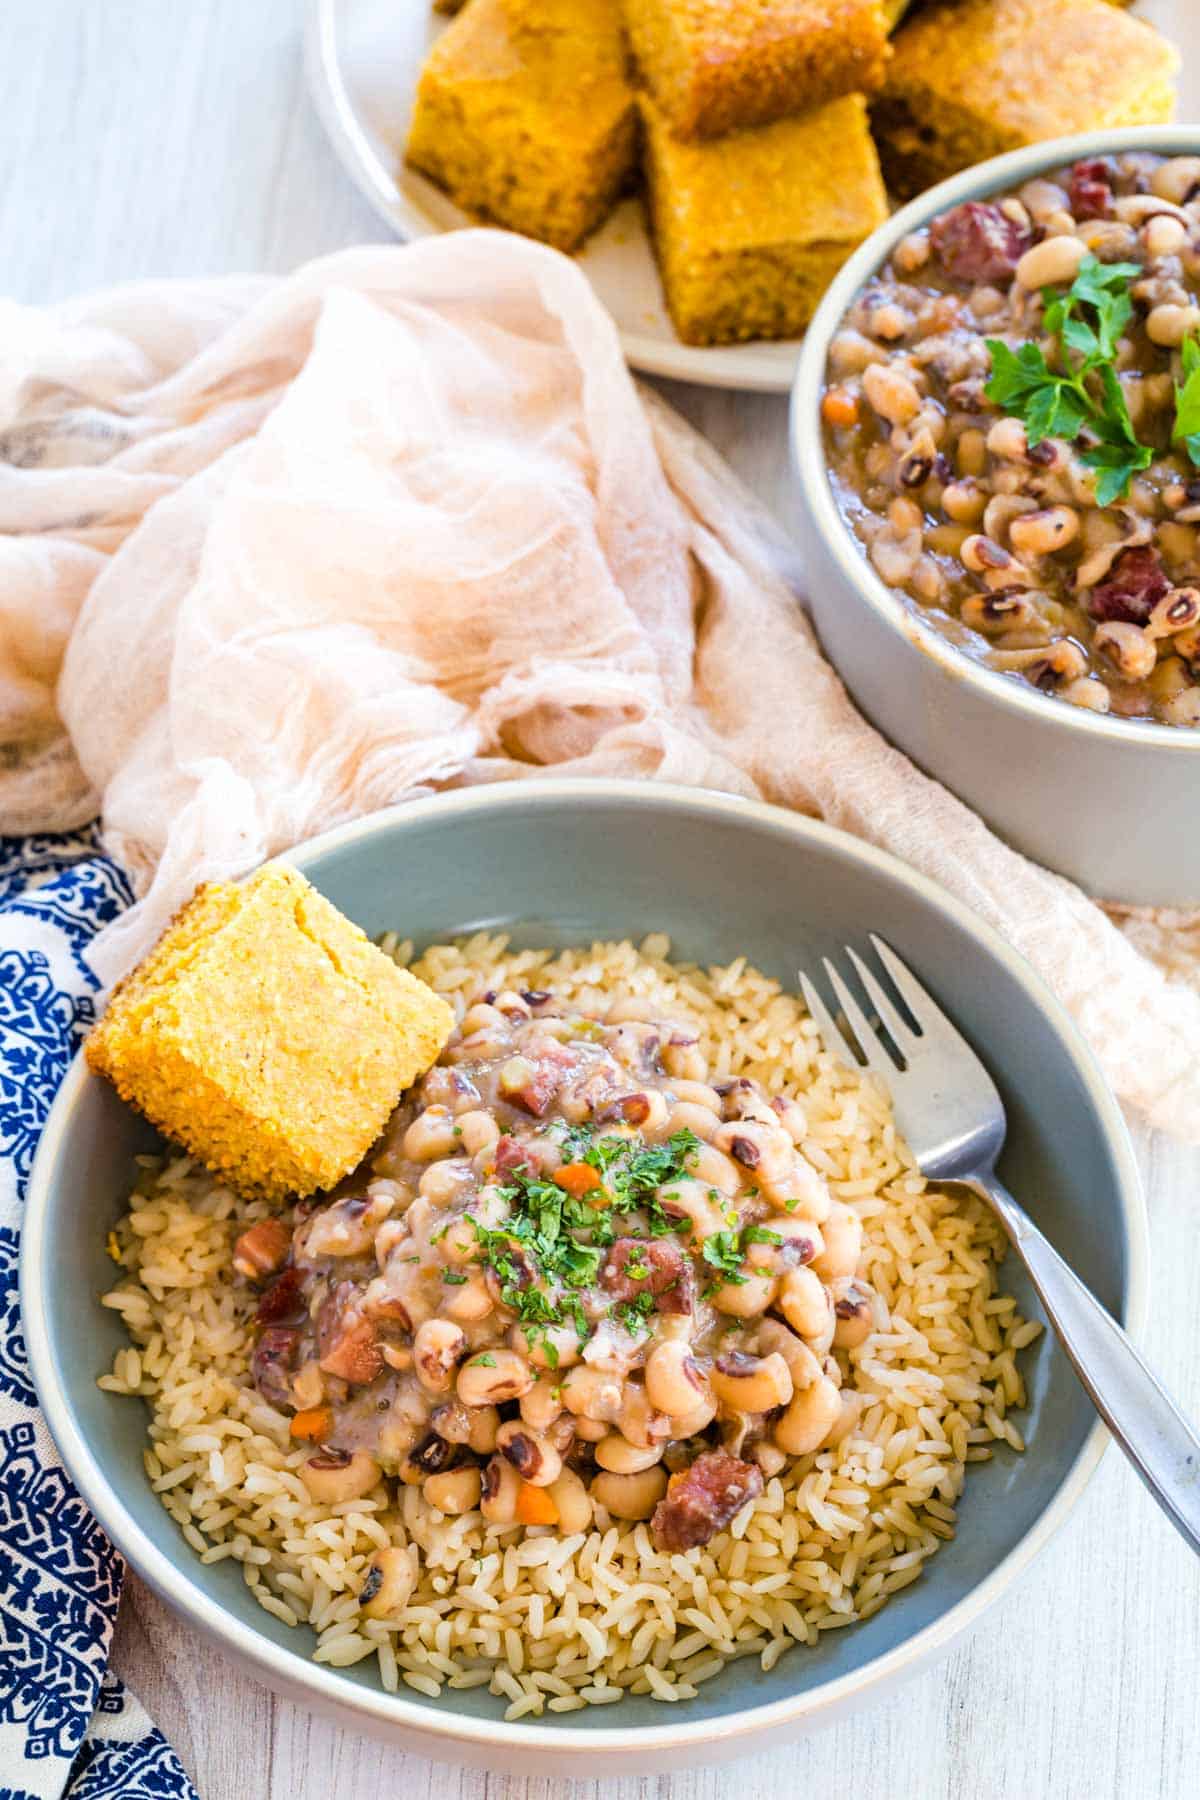 A bowl of black eyed peas next to serving dishes with corn bread.